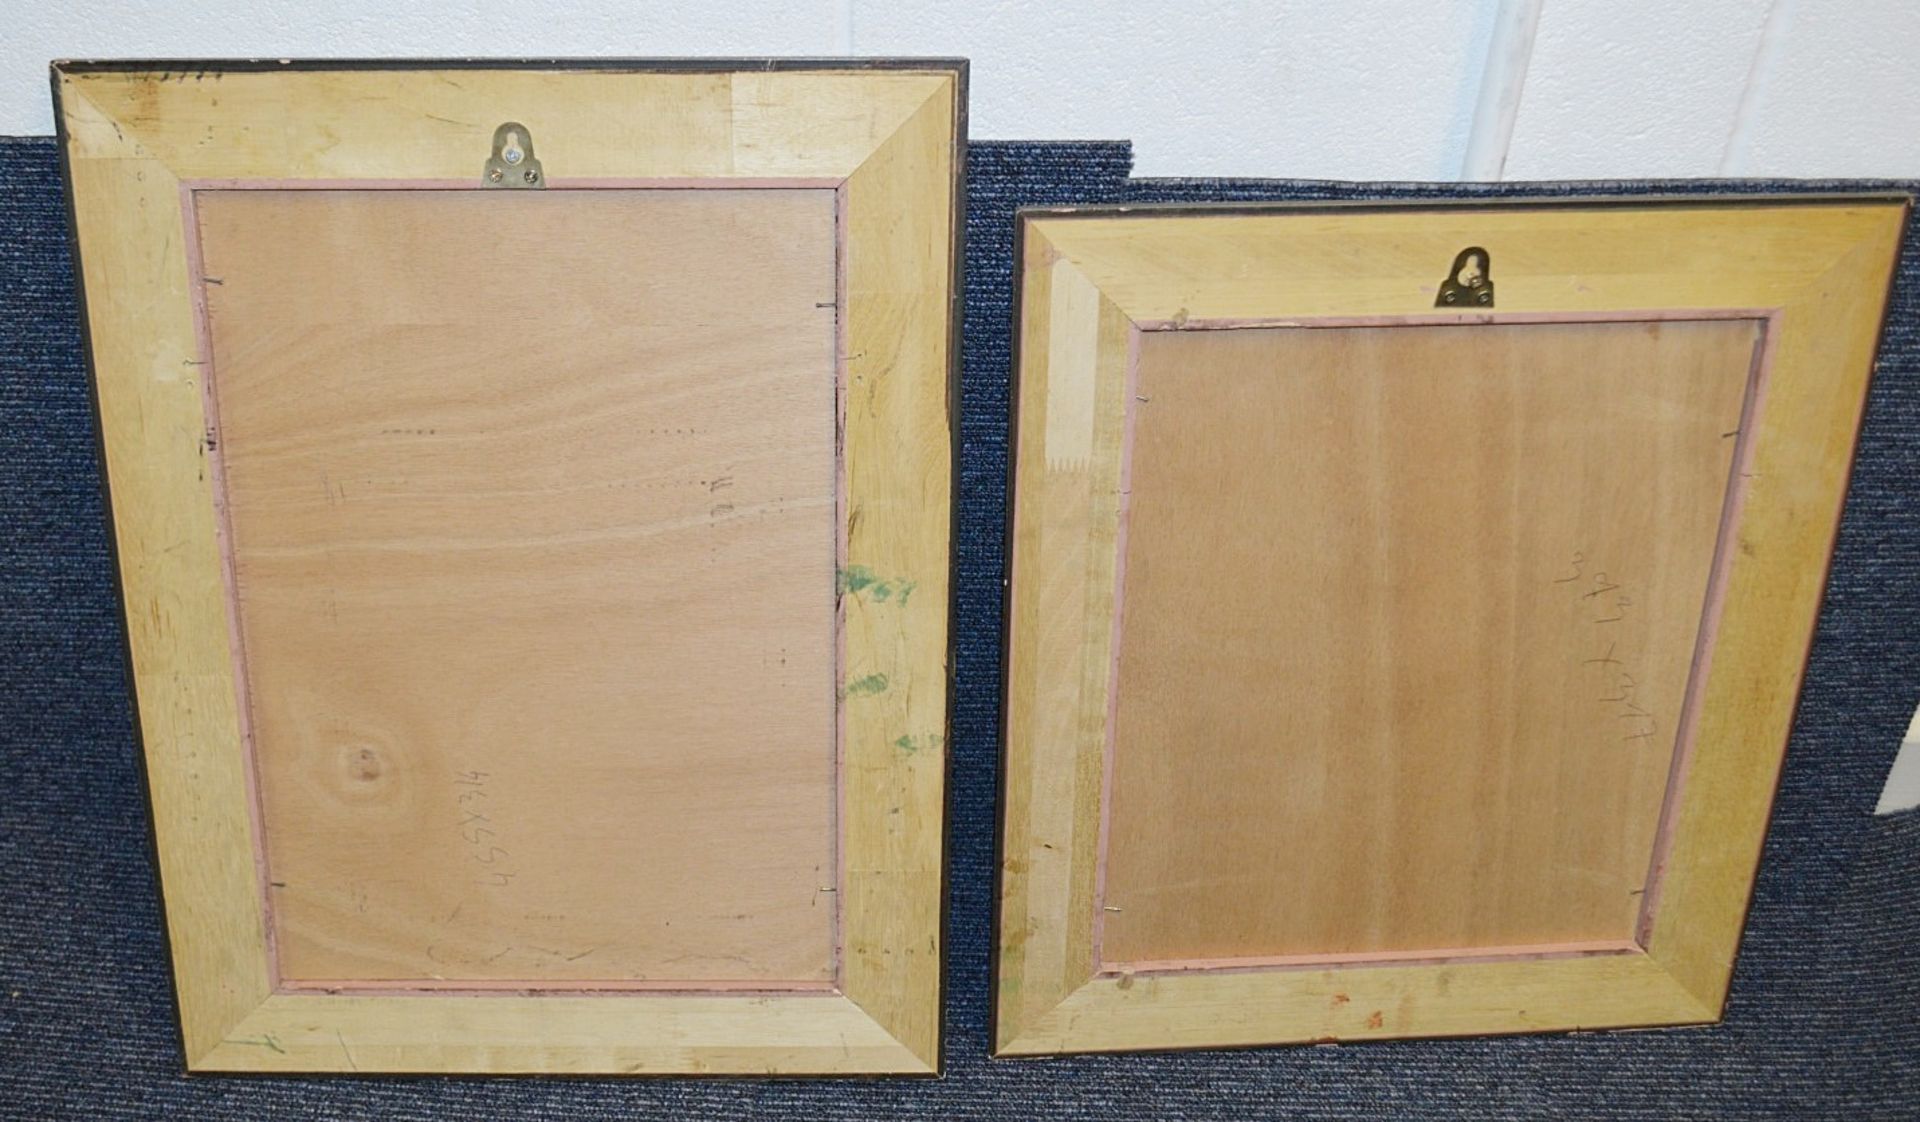 3 x Framed Art Prints Of Bygone Periodicals - Dimensions: W43 x H59 - Ref: Ma404 - CL481 - Location: - Image 5 of 6